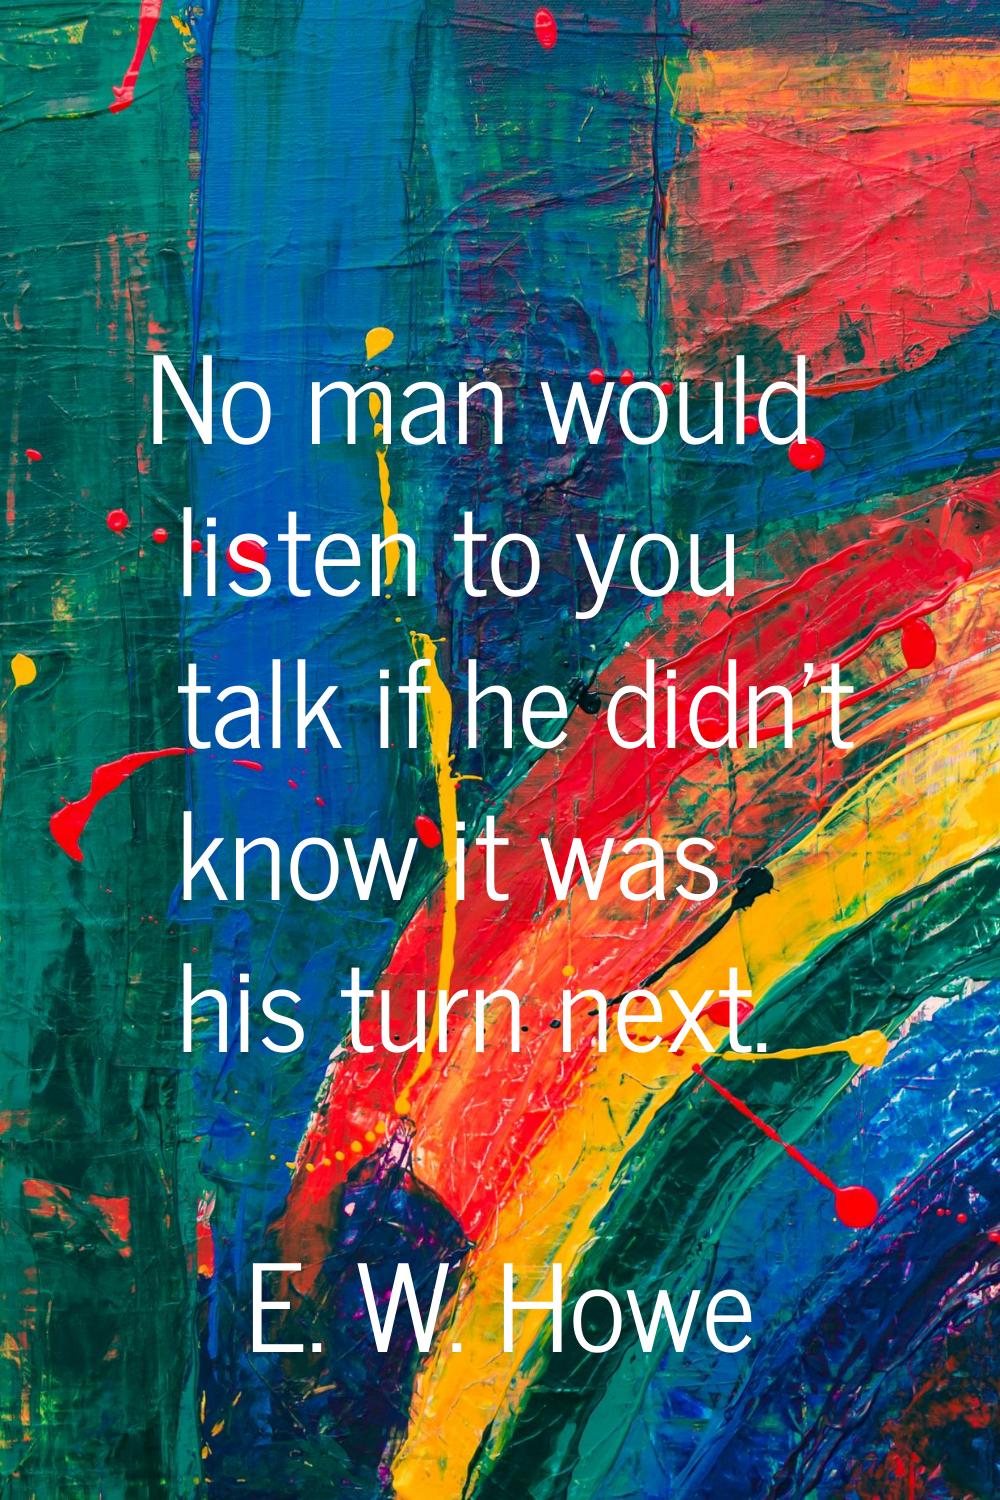 No man would listen to you talk if he didn't know it was his turn next.